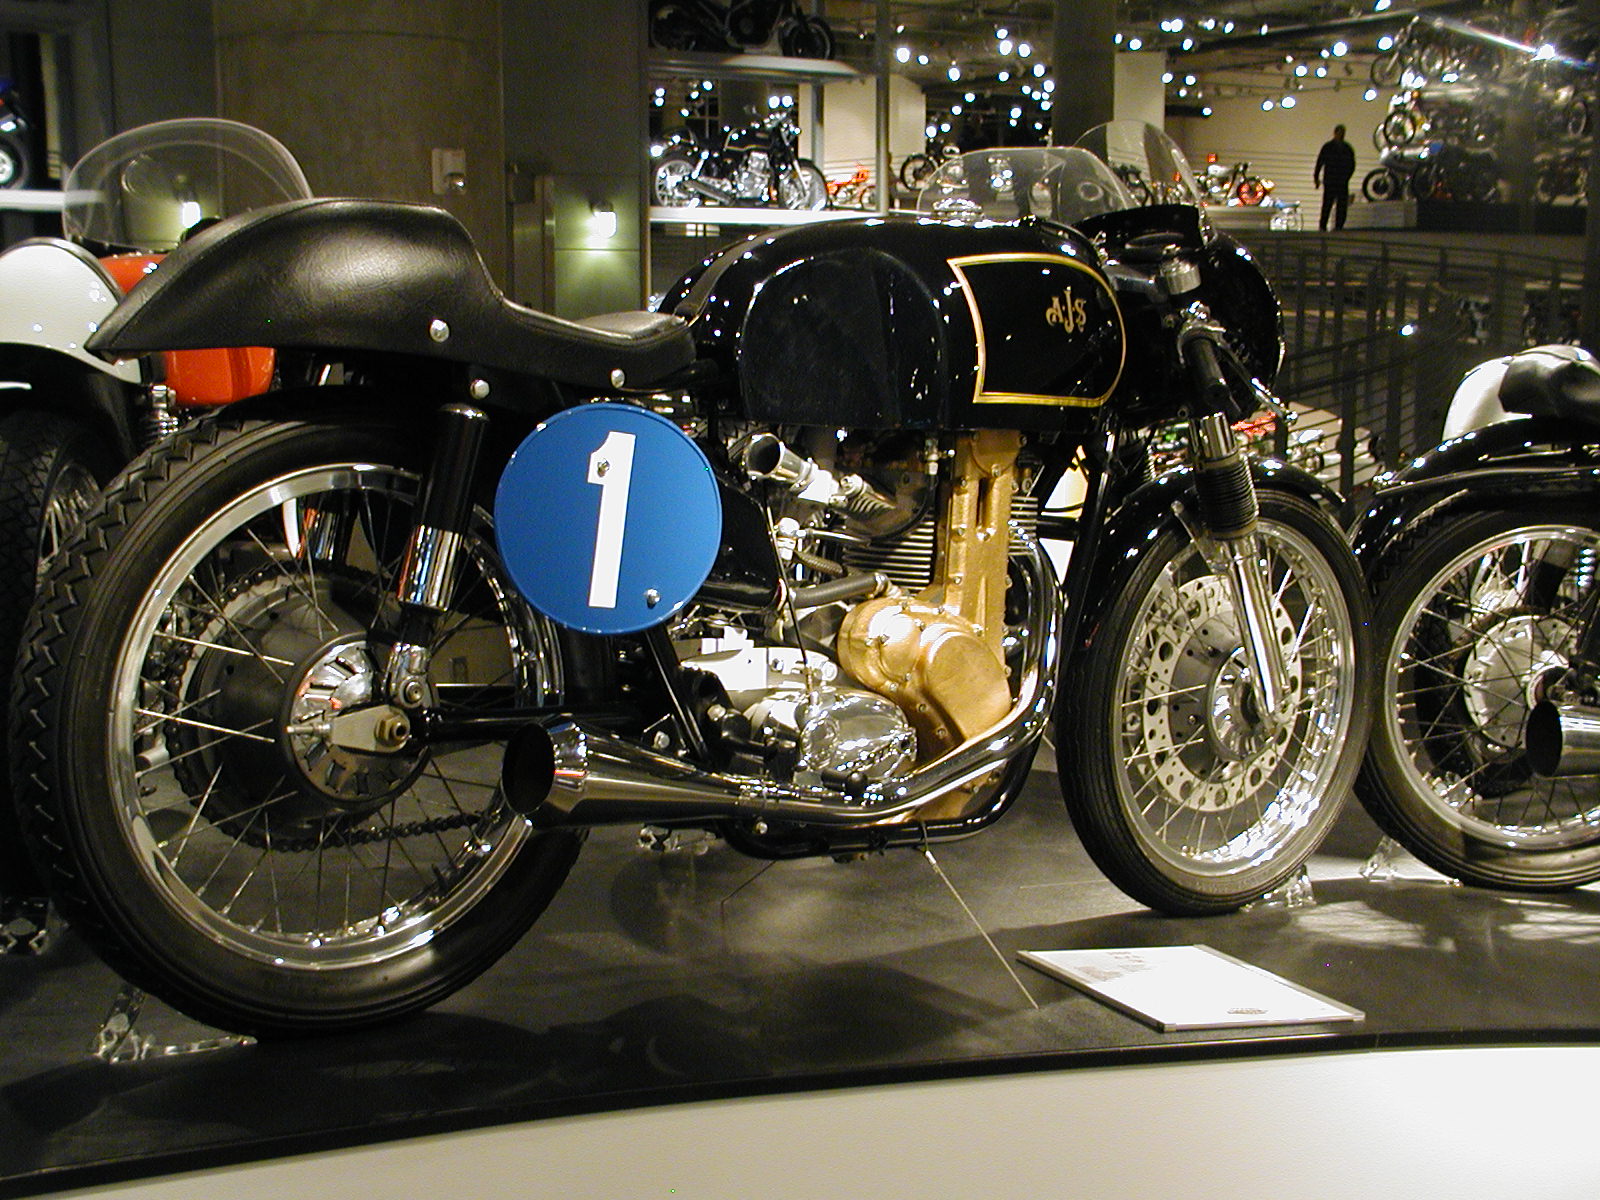 two old fashioned motorcycle on display with people standing